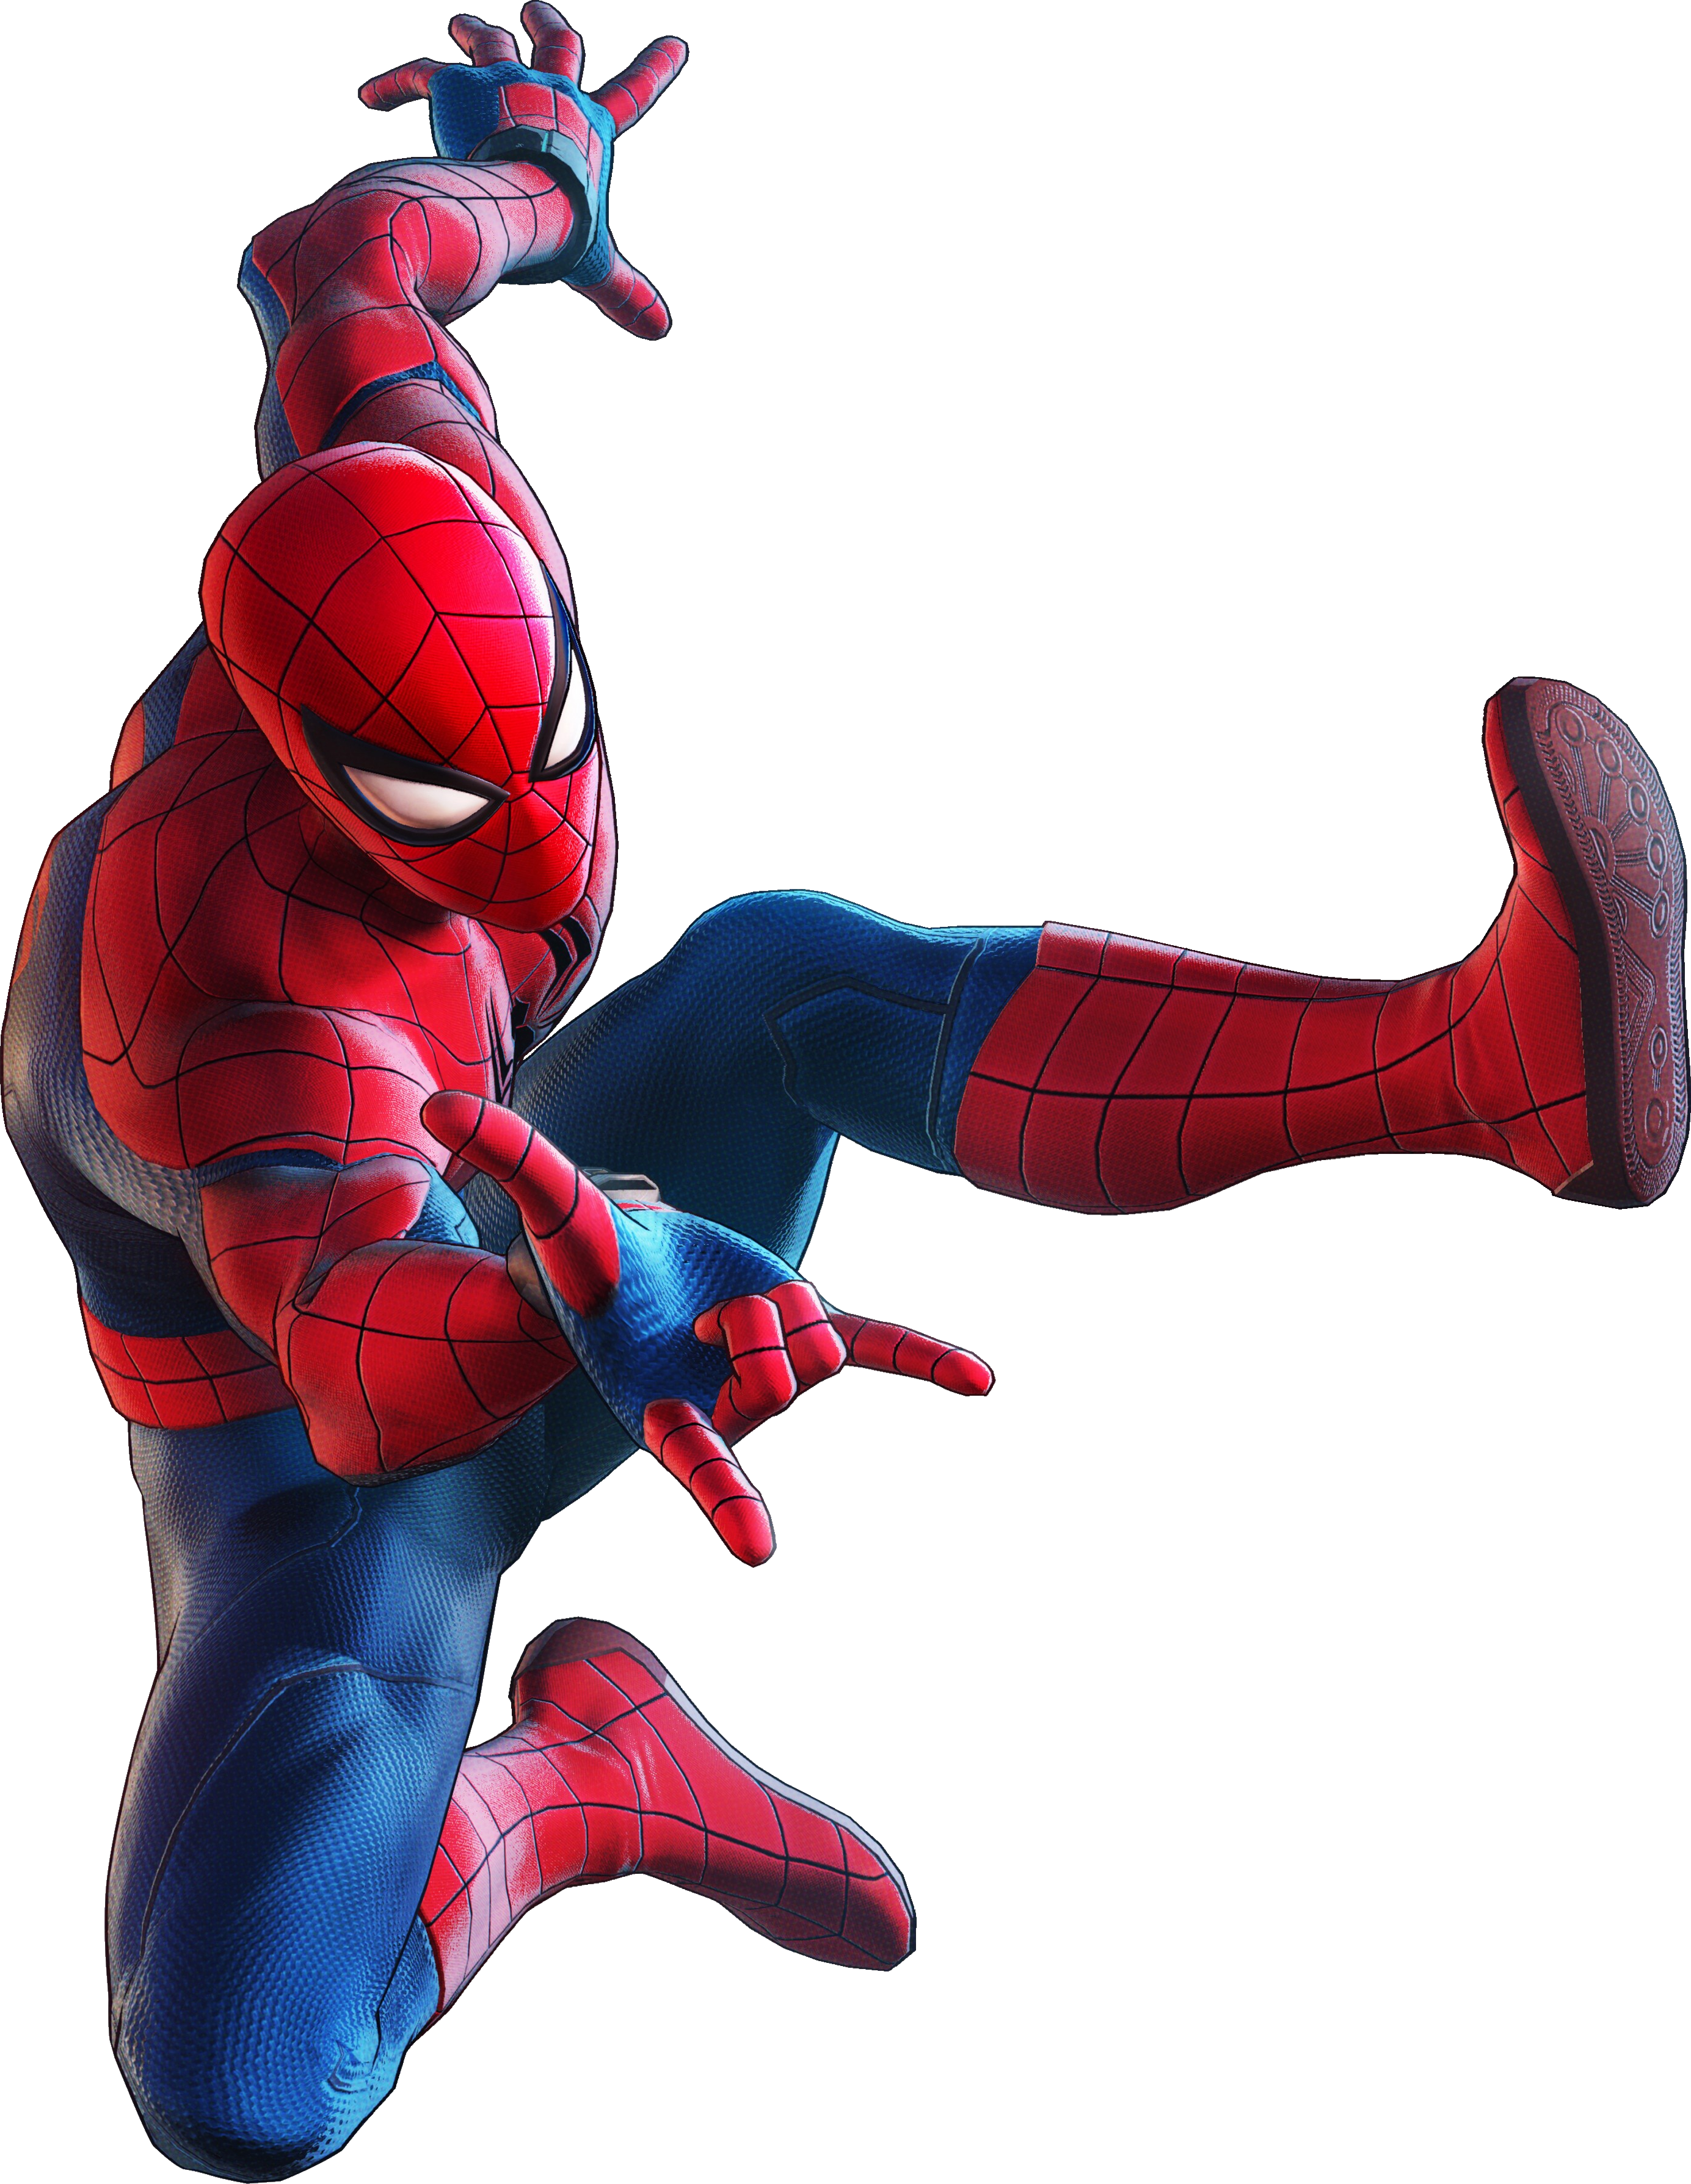 Marvel Ultimate Alliance 3 Spider Man By Steeven7620 On